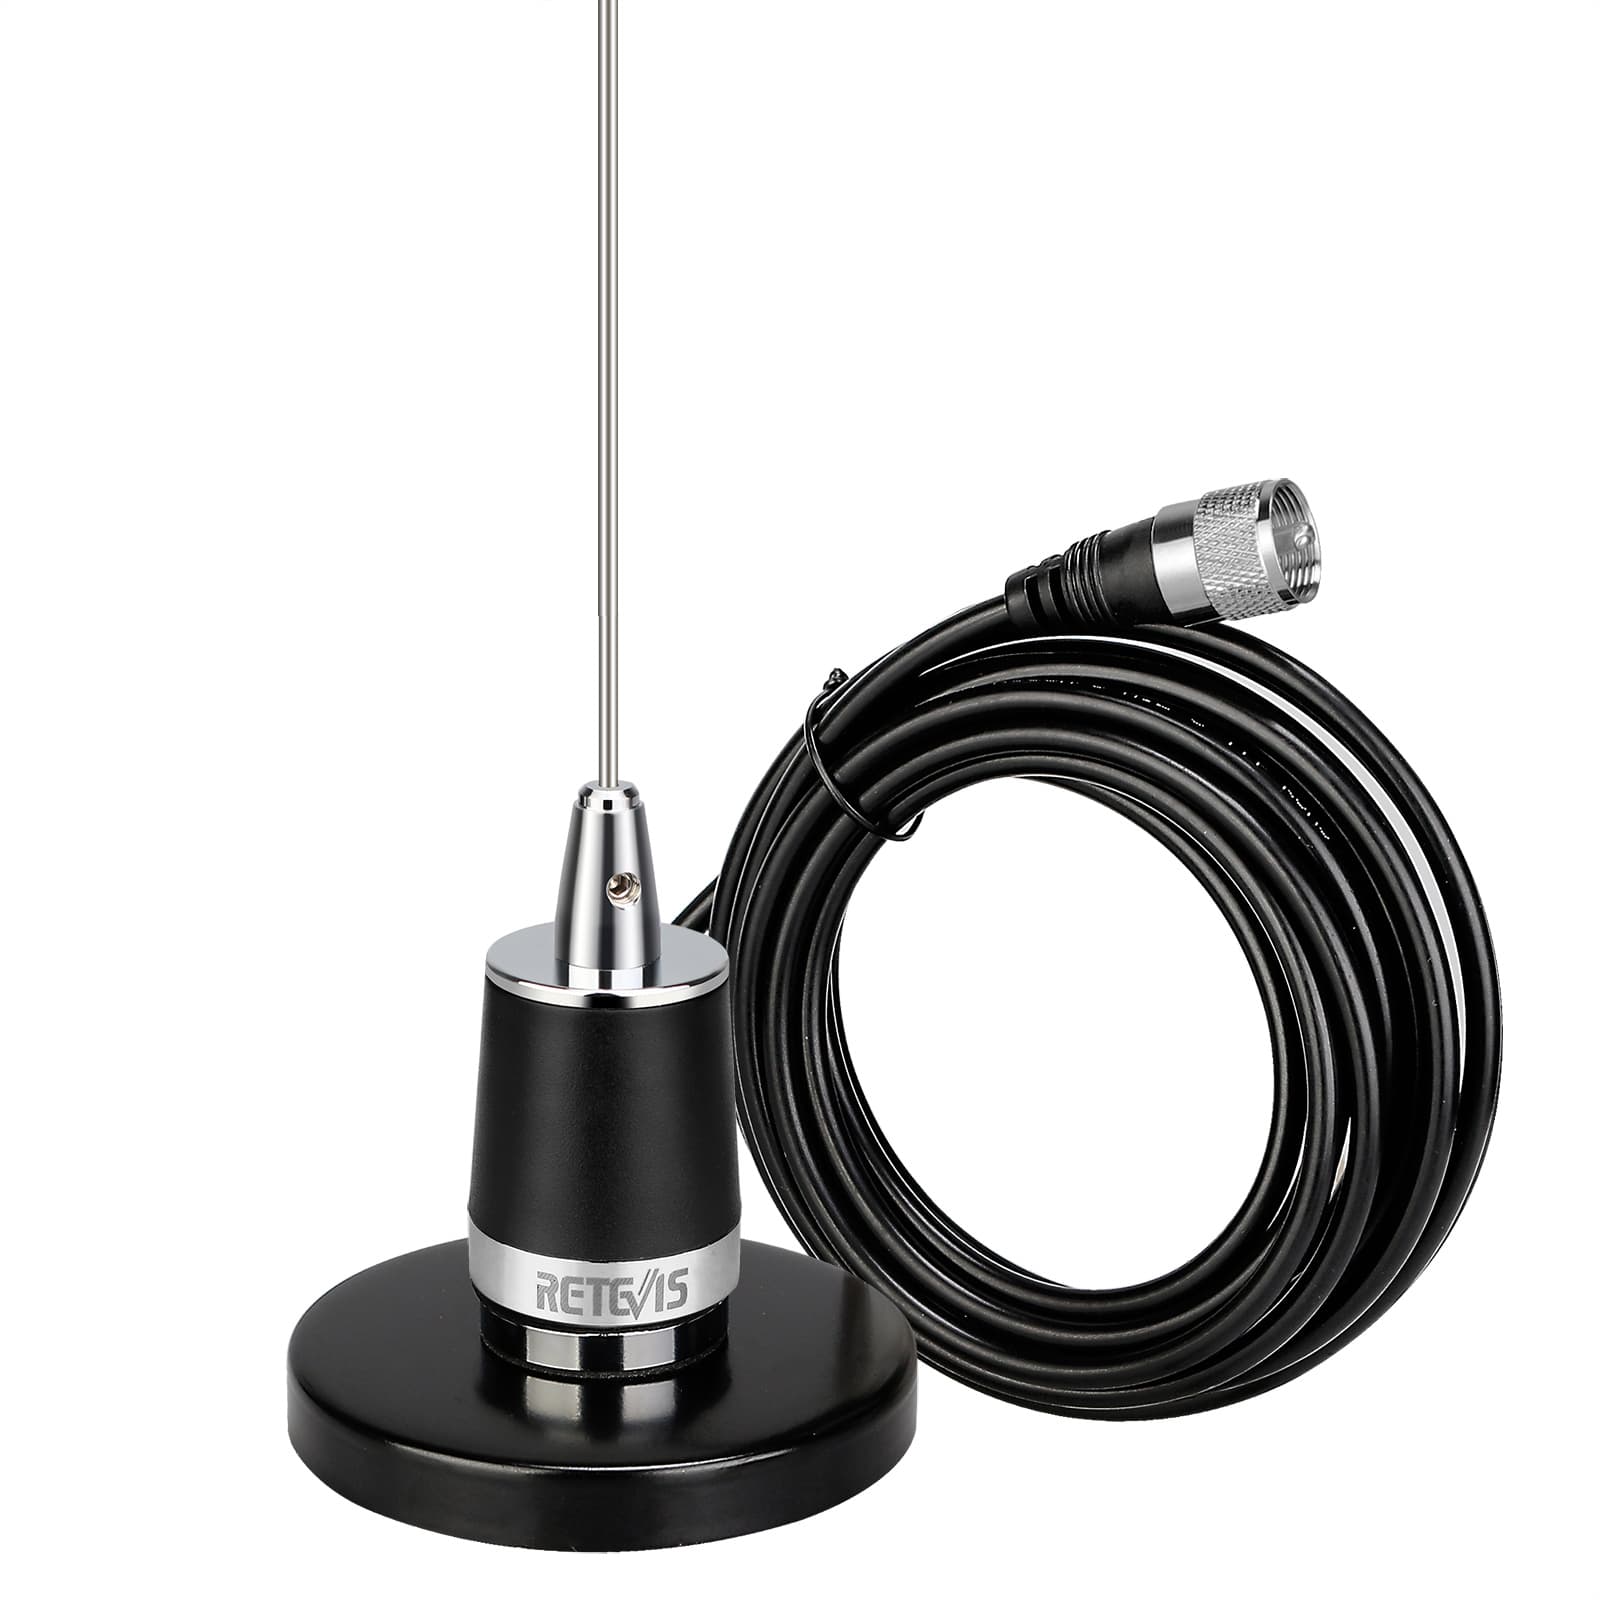 NMO Amateur Mobile Magnet Antenna Dual Band 144/430MHz